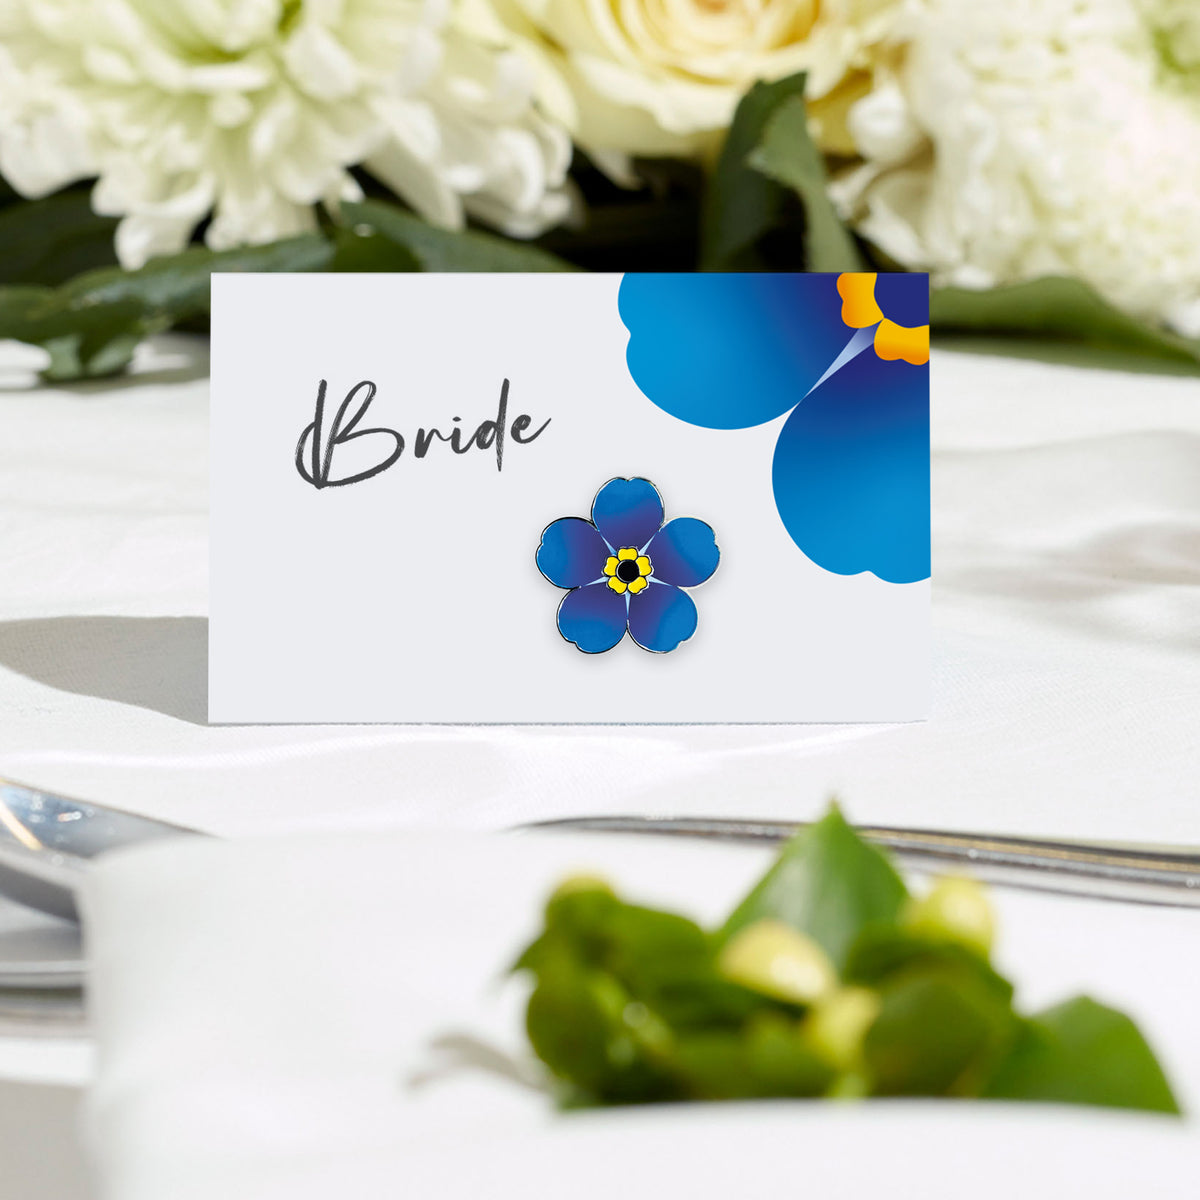 Forget-me-not flower wedding table cards x 10